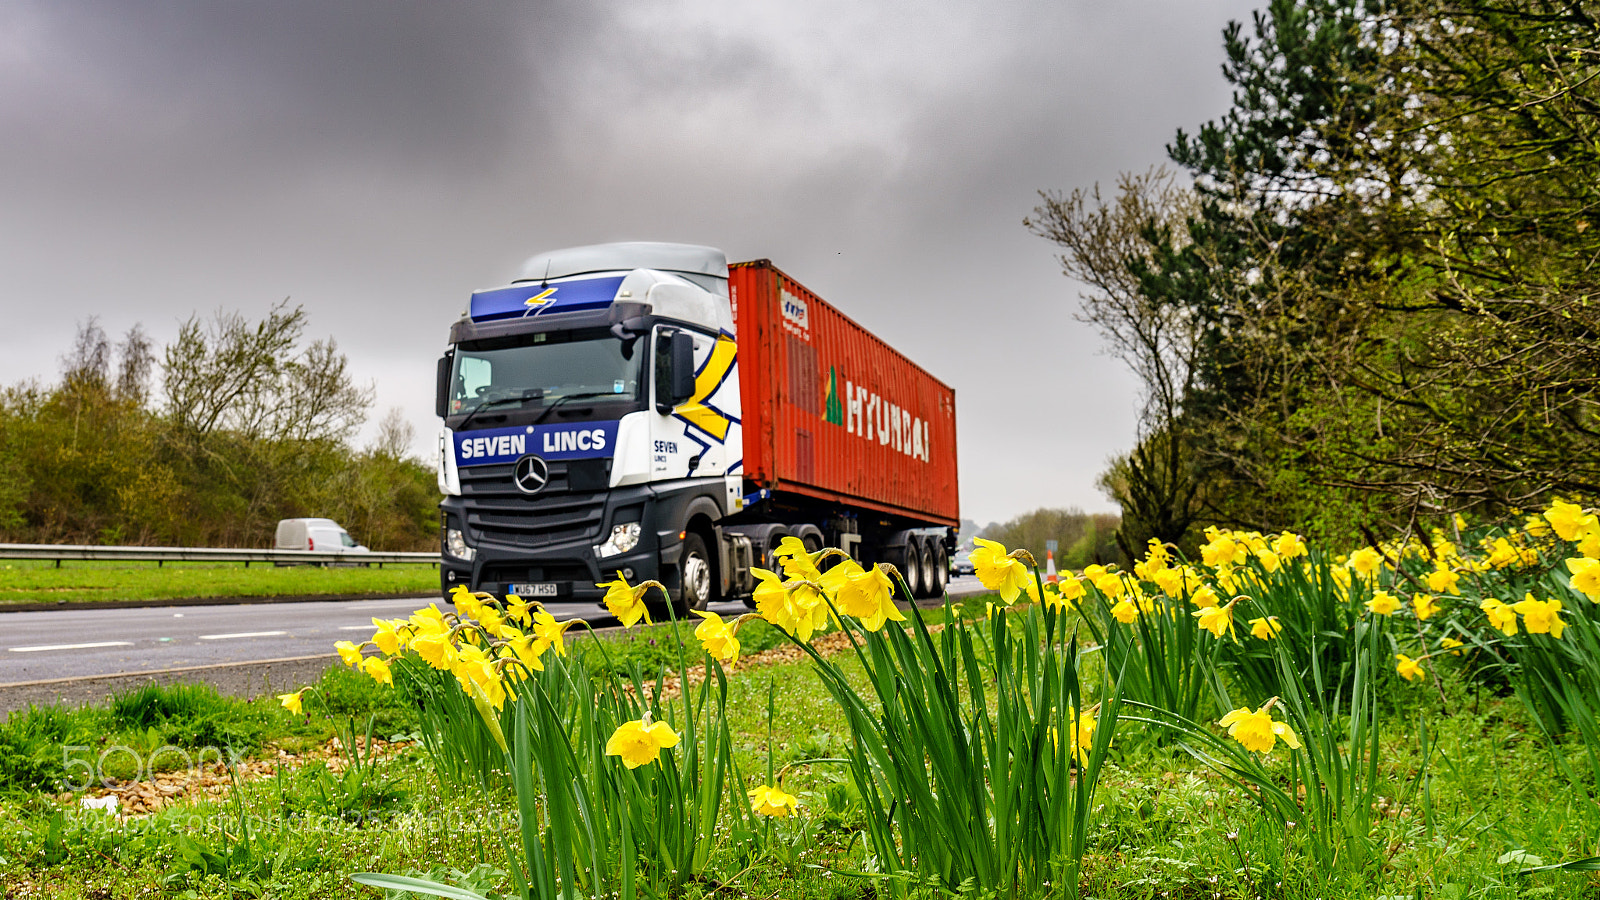 Sony a7 sample photo. Spring trucking photography